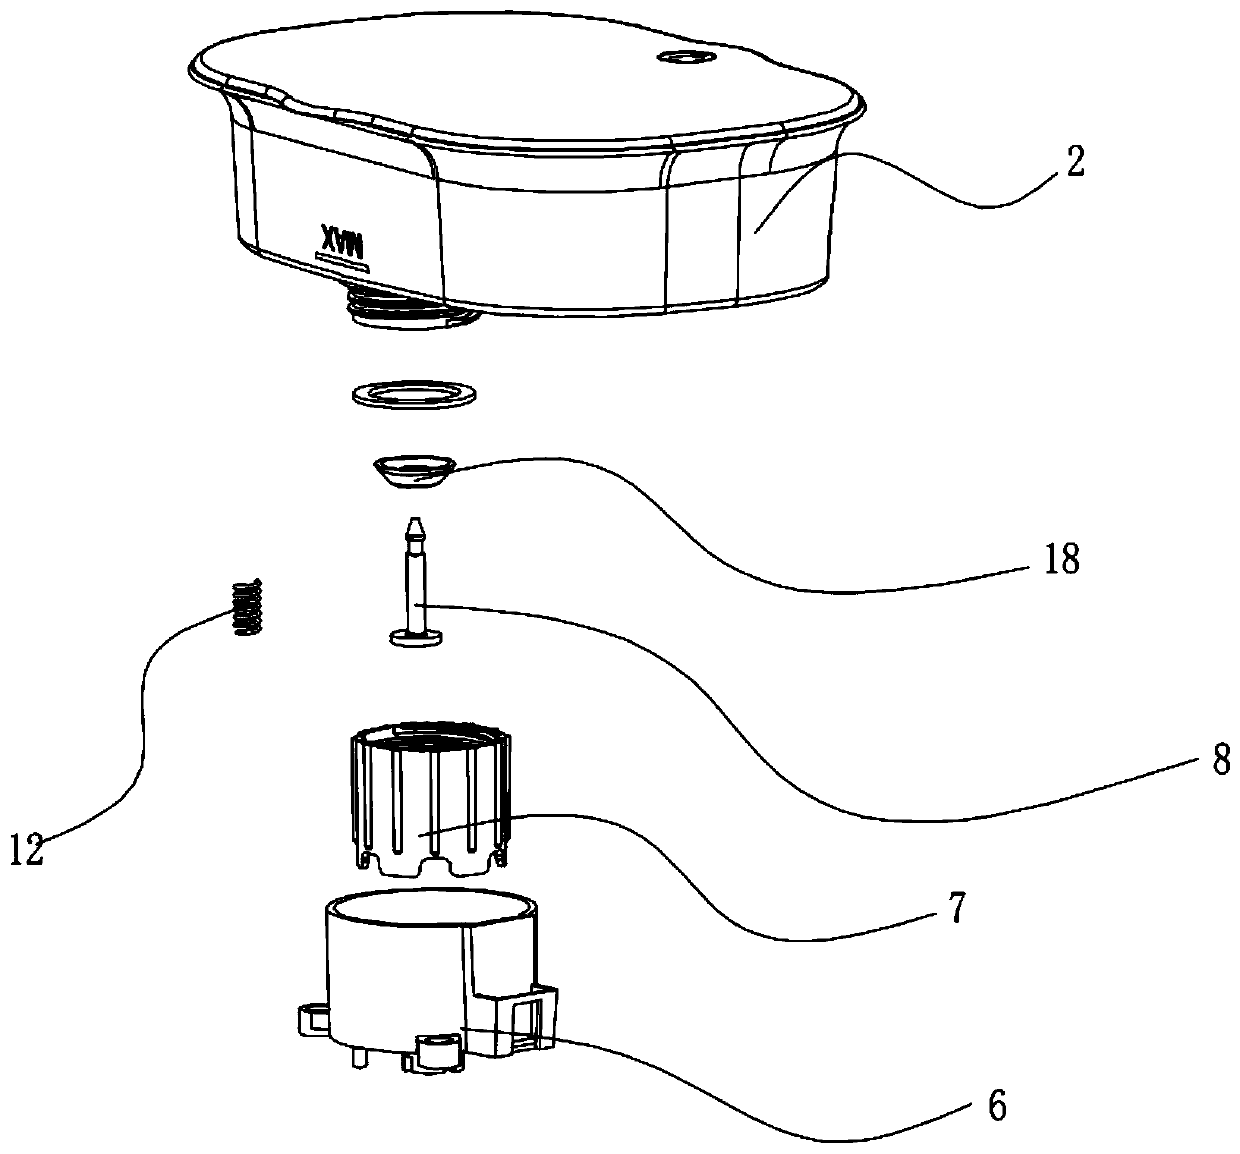 Drainage structure of air fryer with cooking function